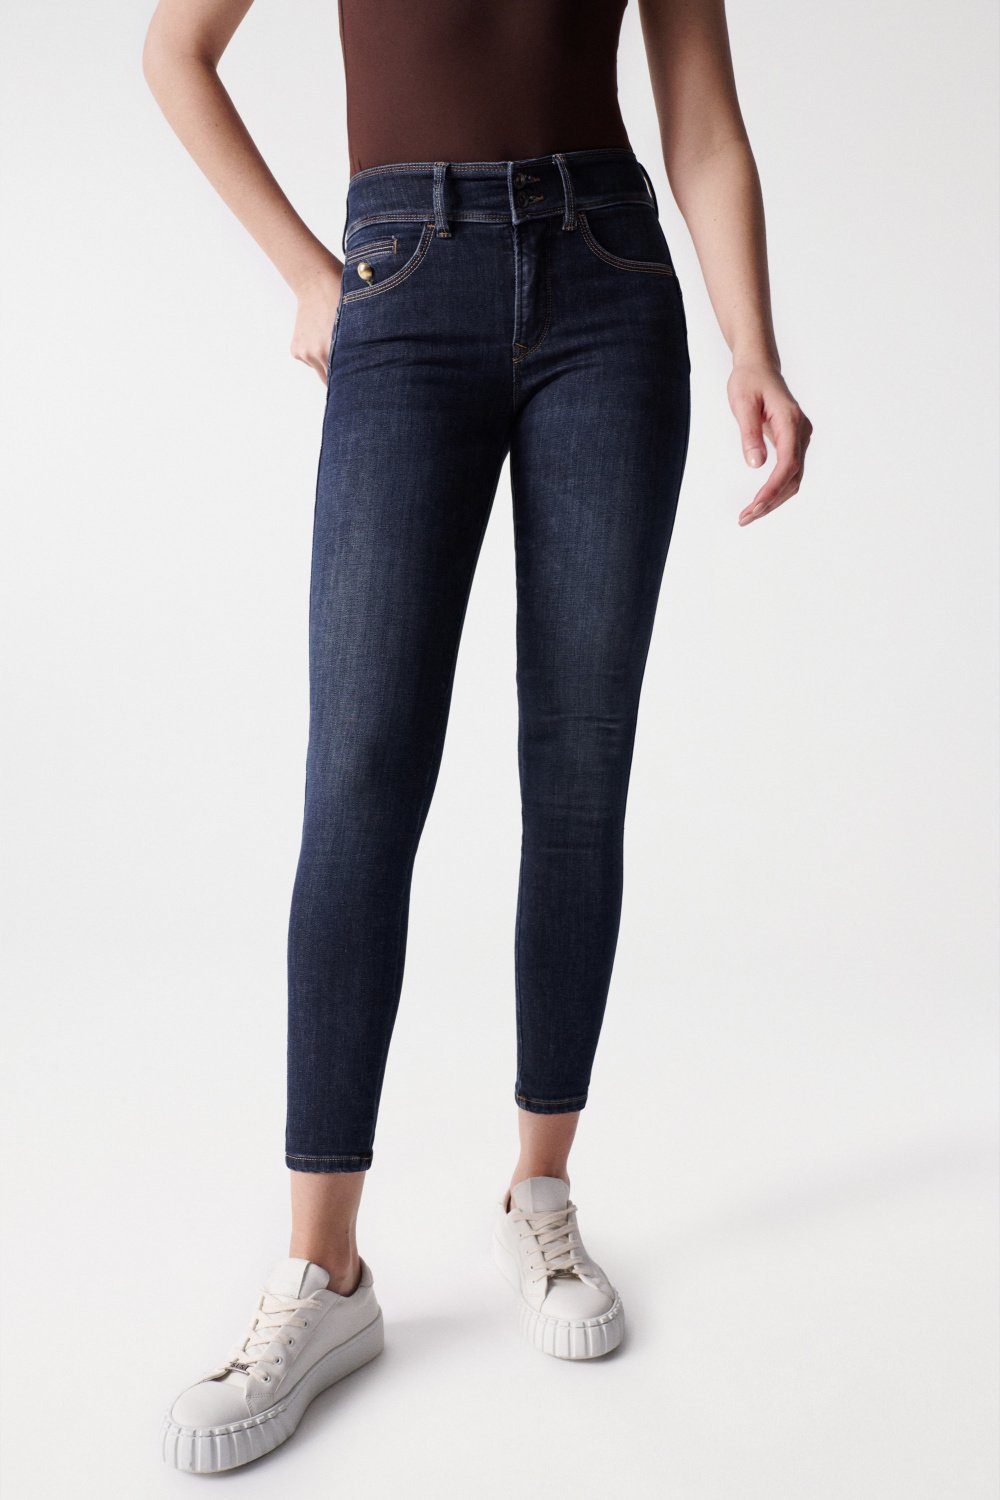 PUSH IN SECRET JEANS WITH BUTTON ON POCKET - Salsa